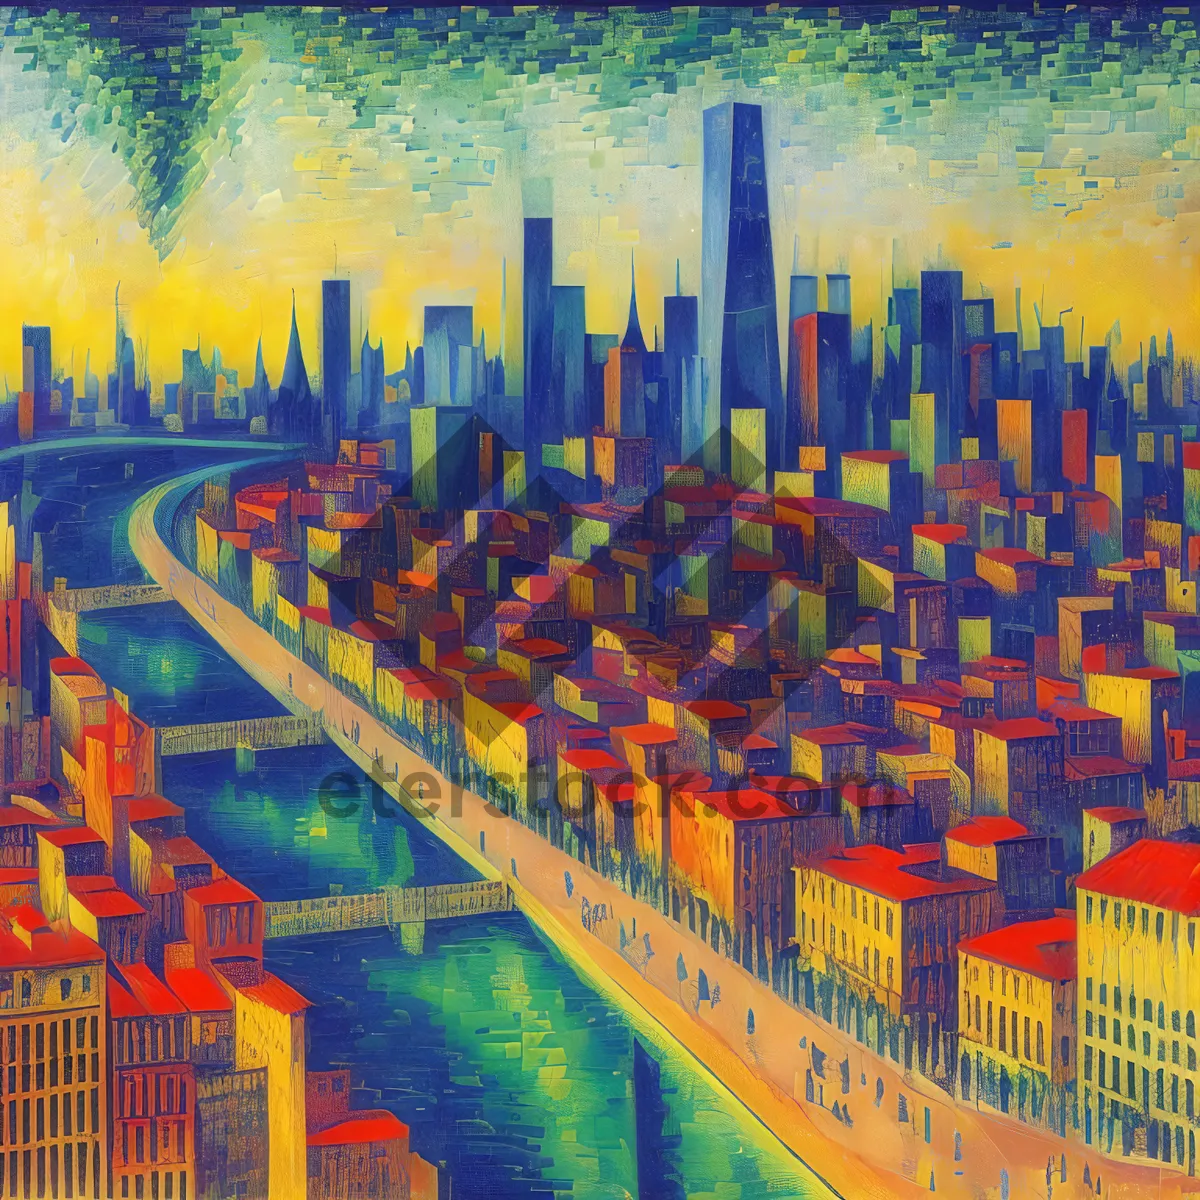 Picture of Urban Glow: Architectural Cityscape with Stylized Skyscrapers